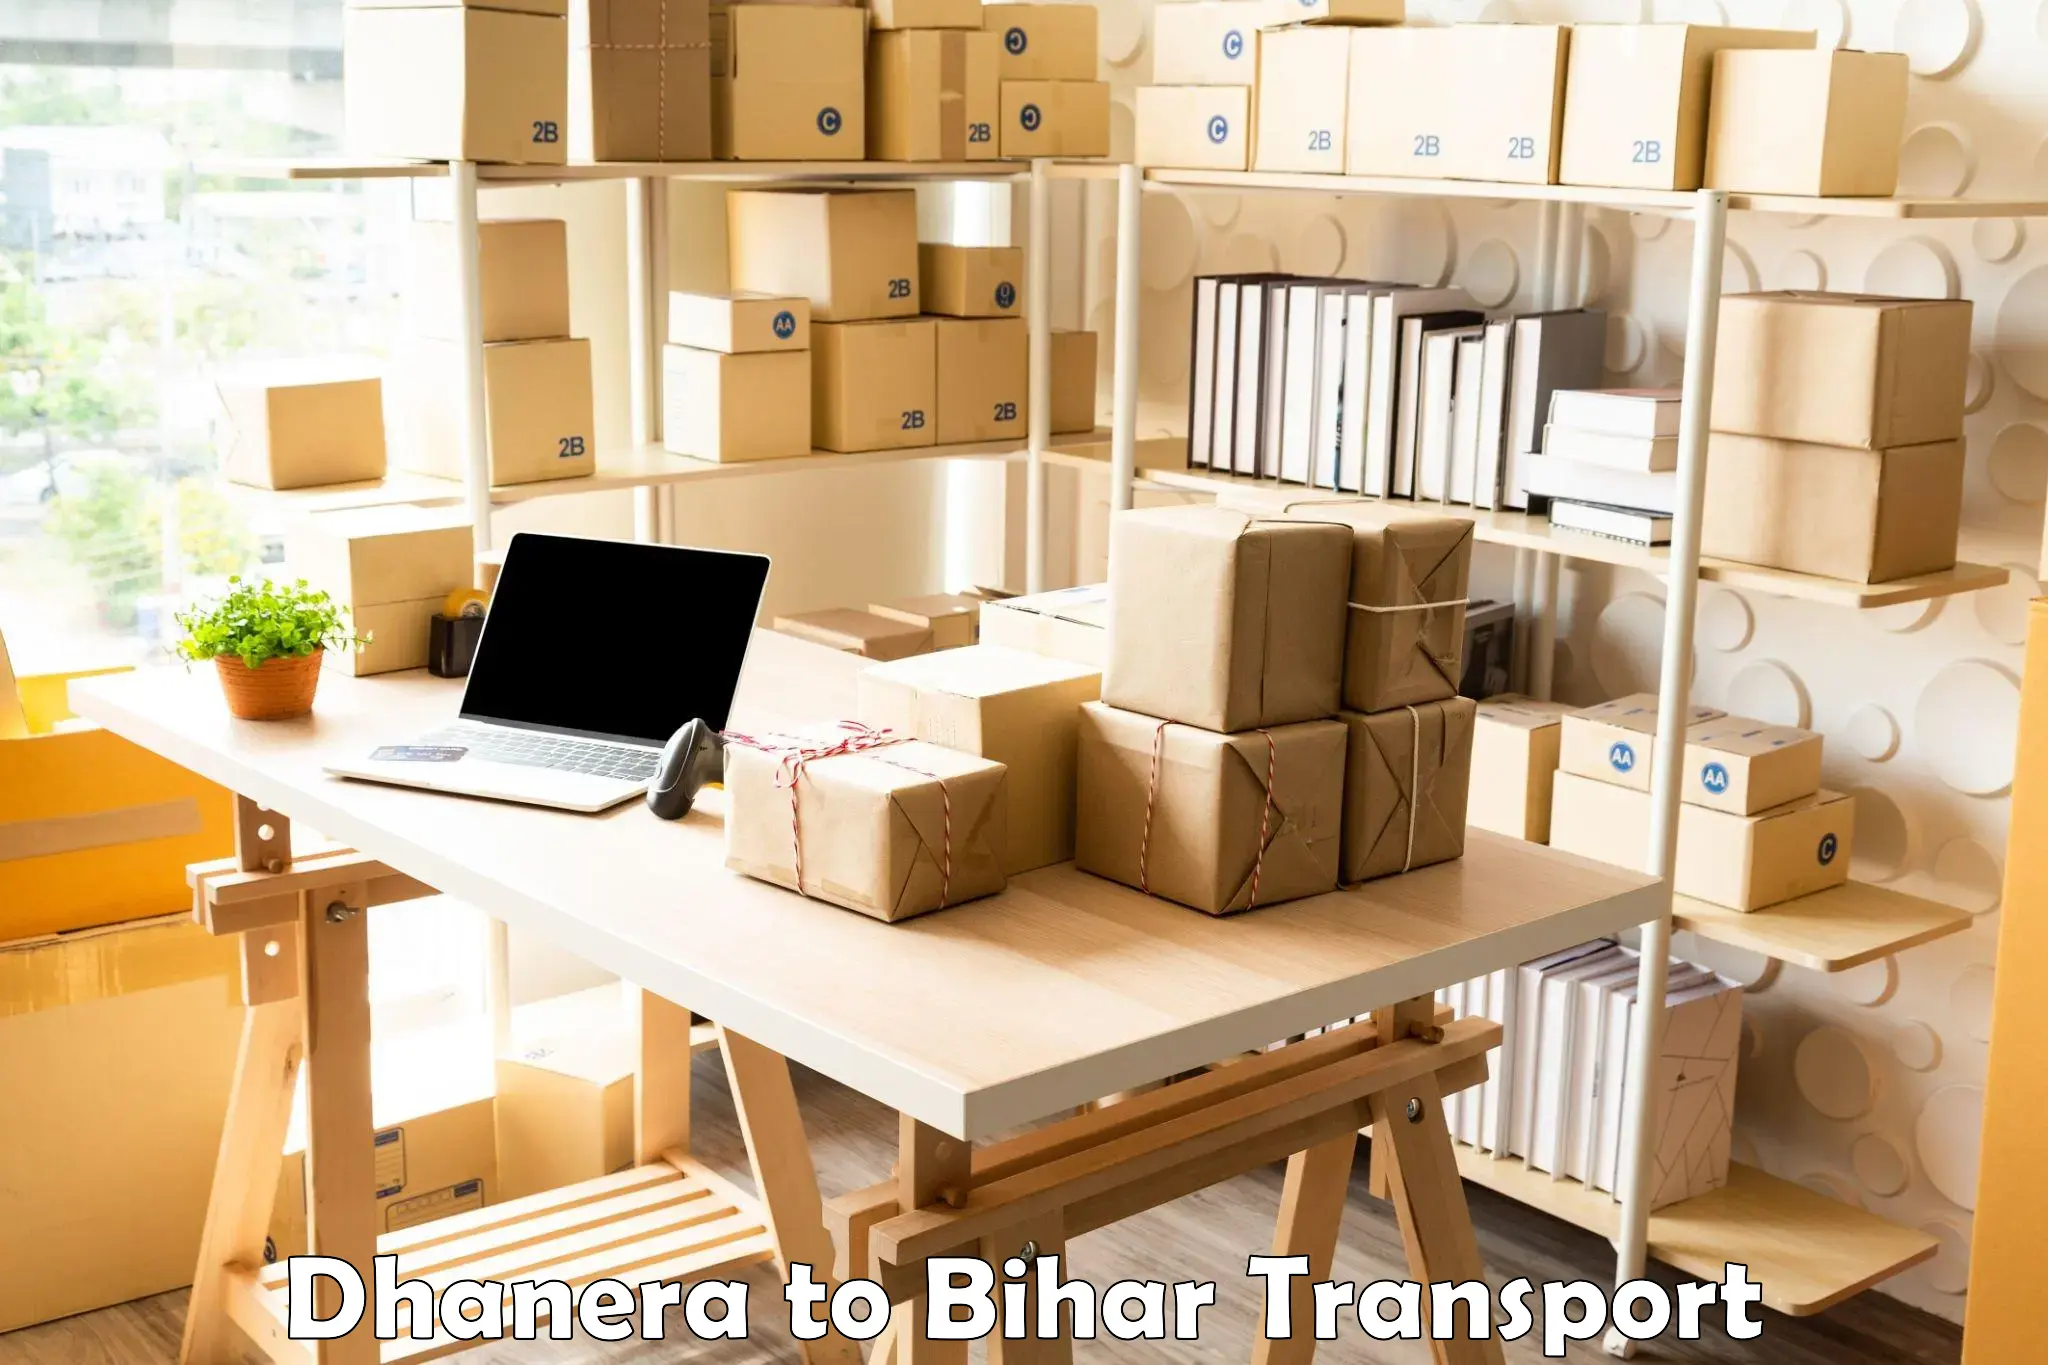 Transportation services in Dhanera to Munger